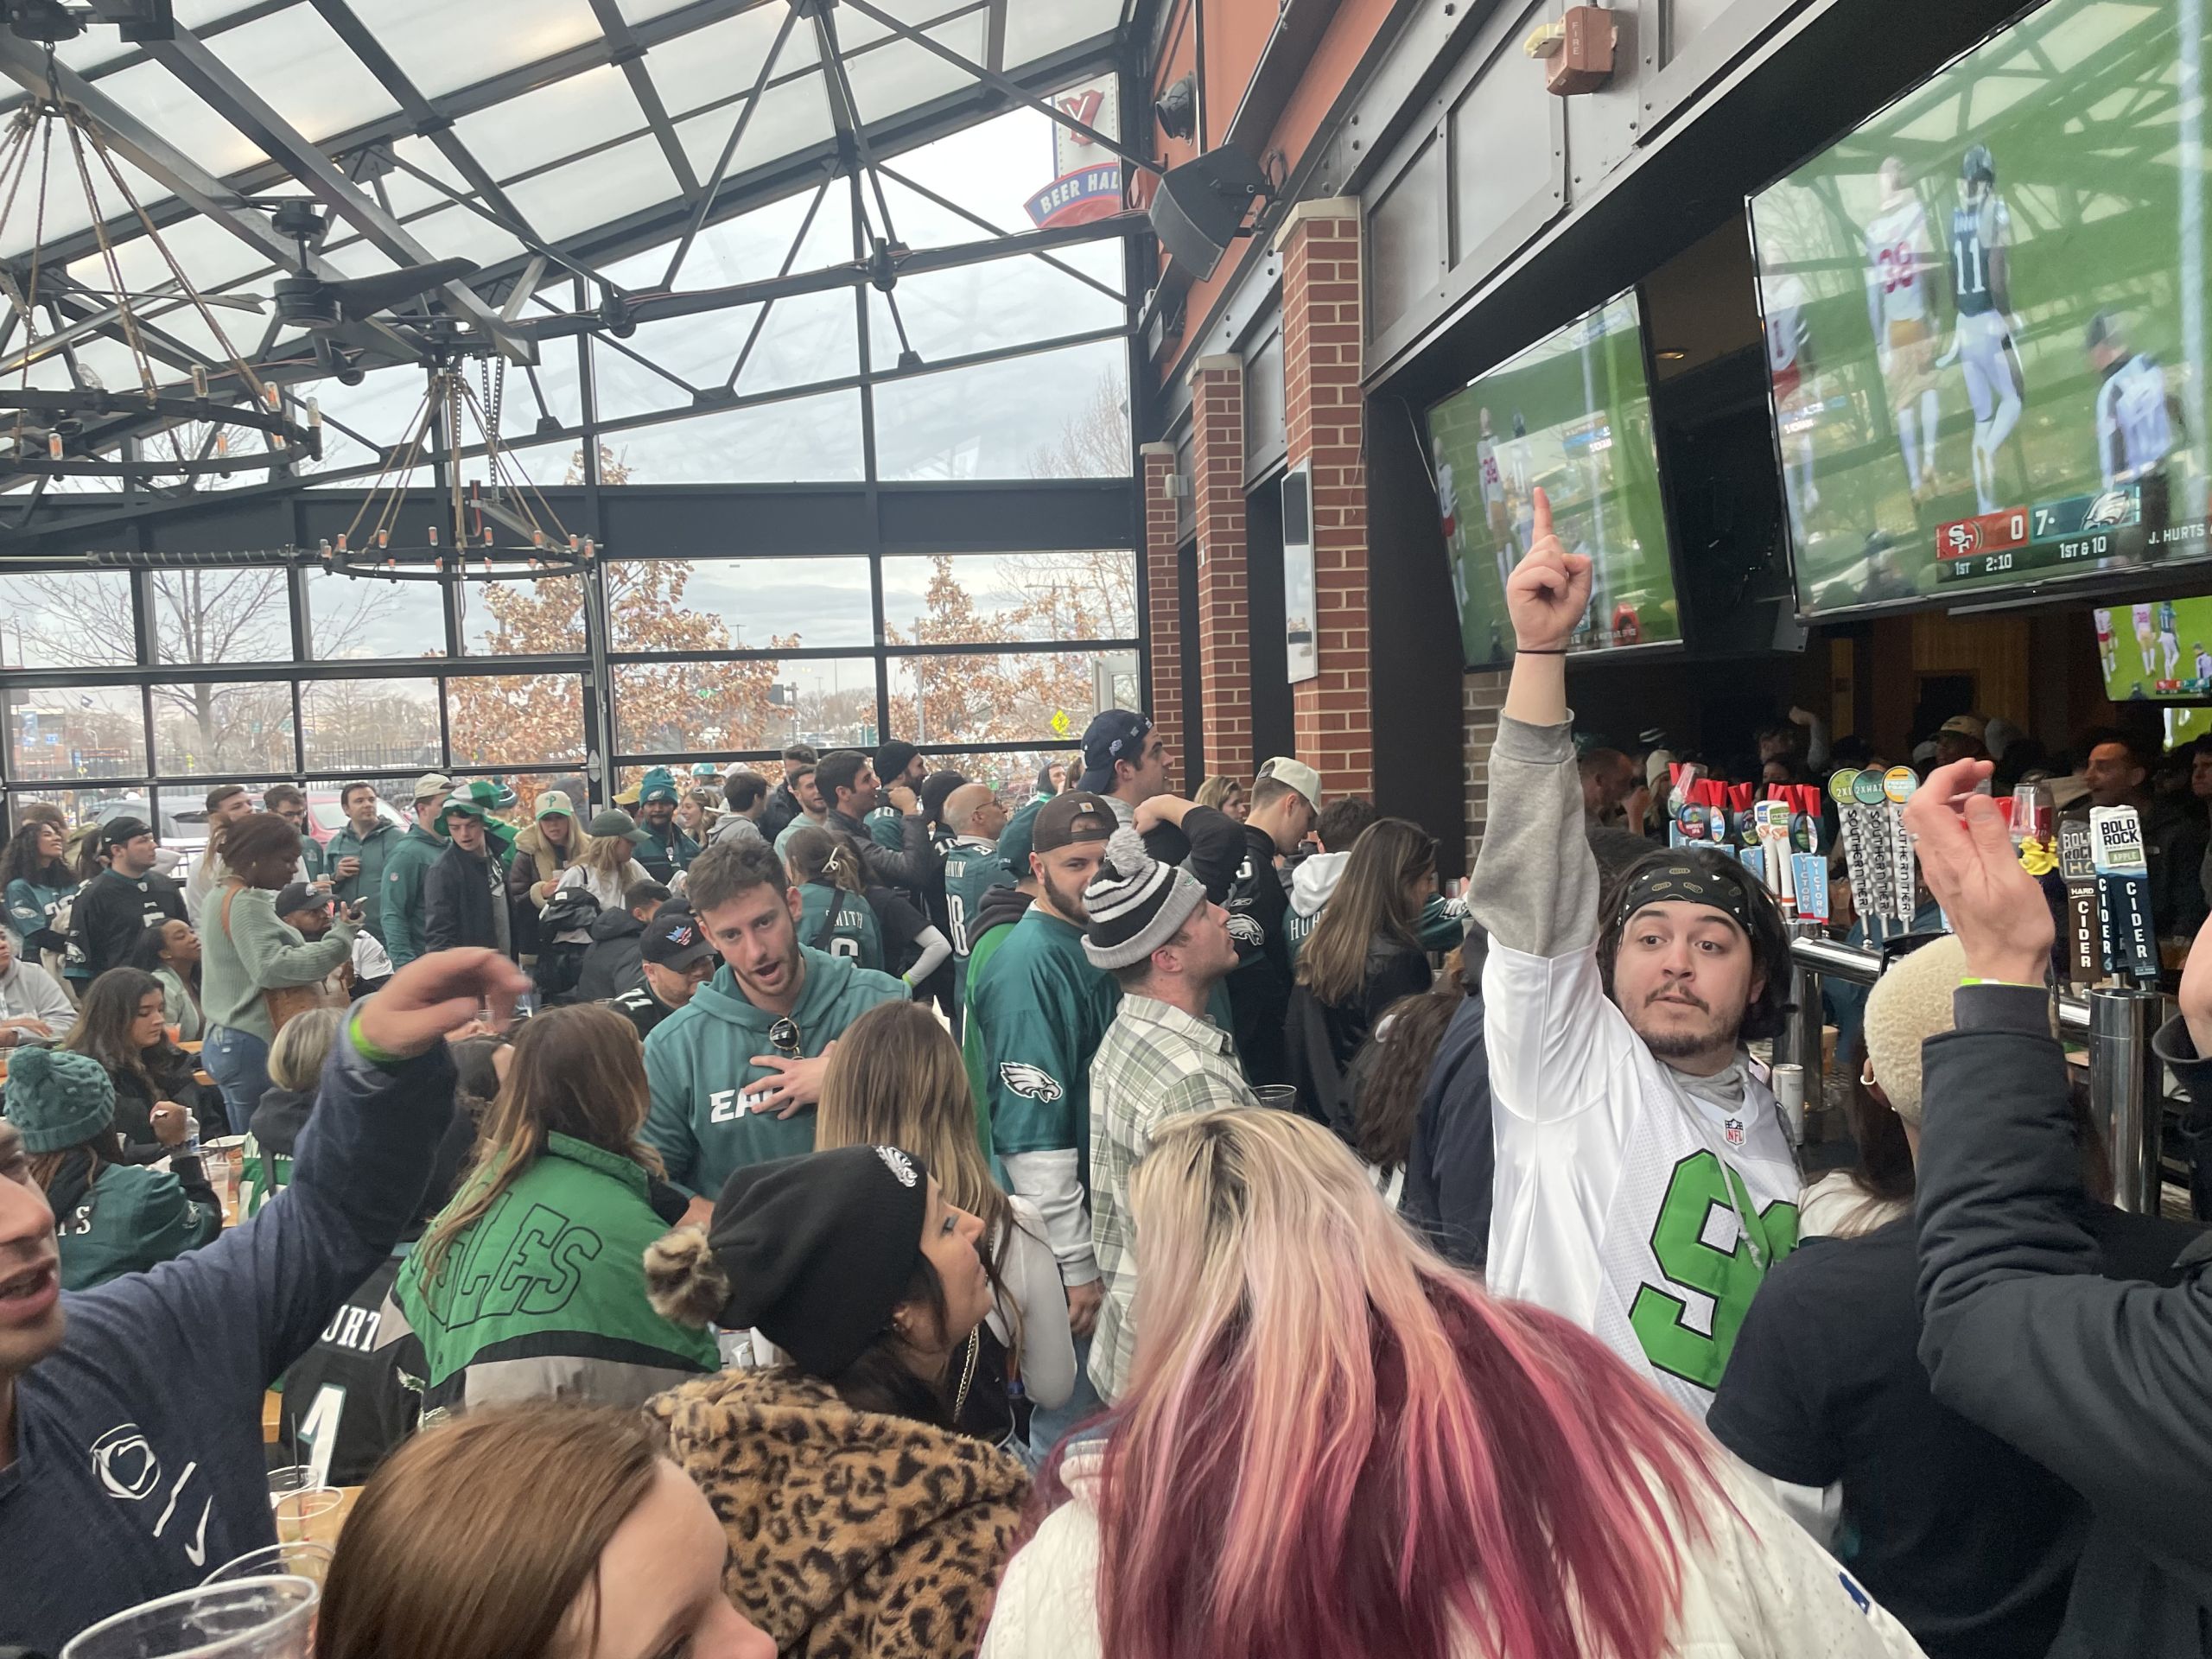 Fans celebrate the Eagles playing in the NFC Championship at Xfinity Live. Photo by Kelly Kane.